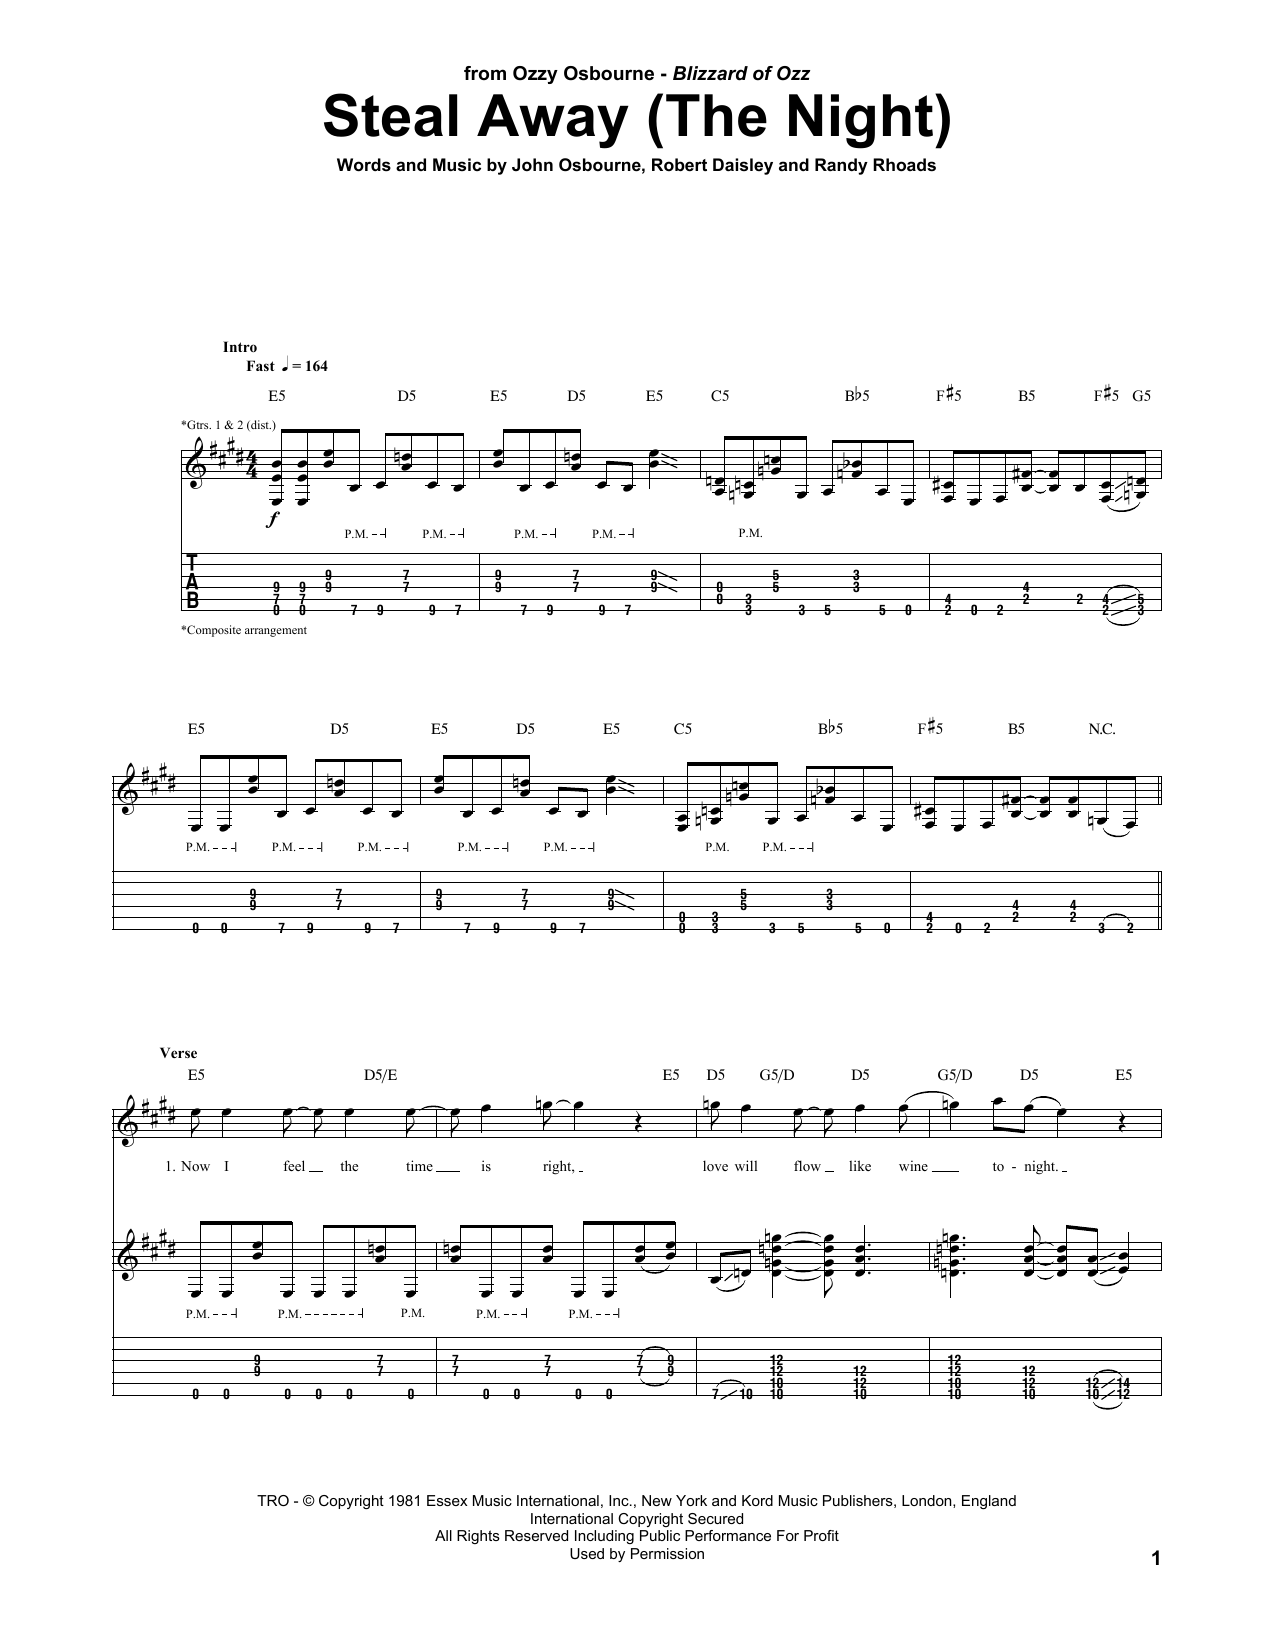 Download Ozzy Osbourne Steal Away (The Night) Sheet Music